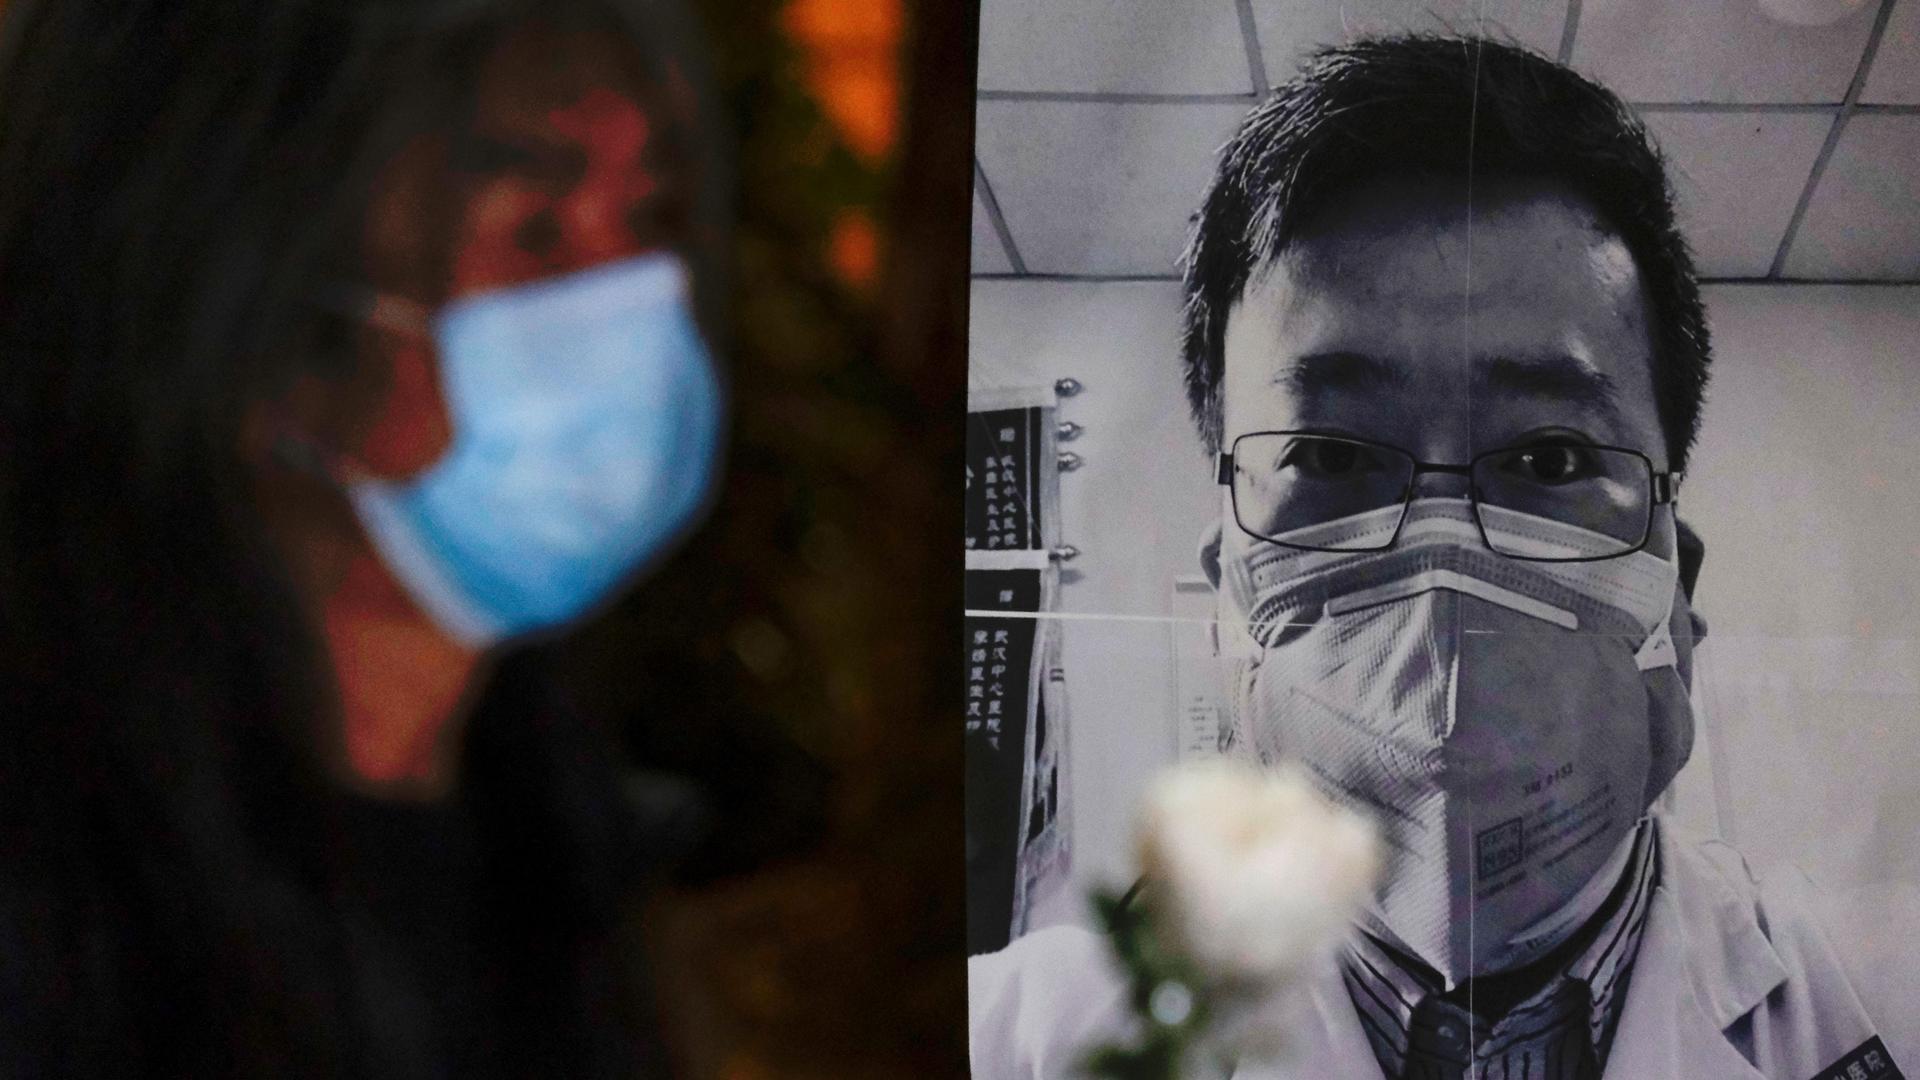 A person wearing a mask is shown in soft focu near a black and white photograph of Dr. Li Wenliang.